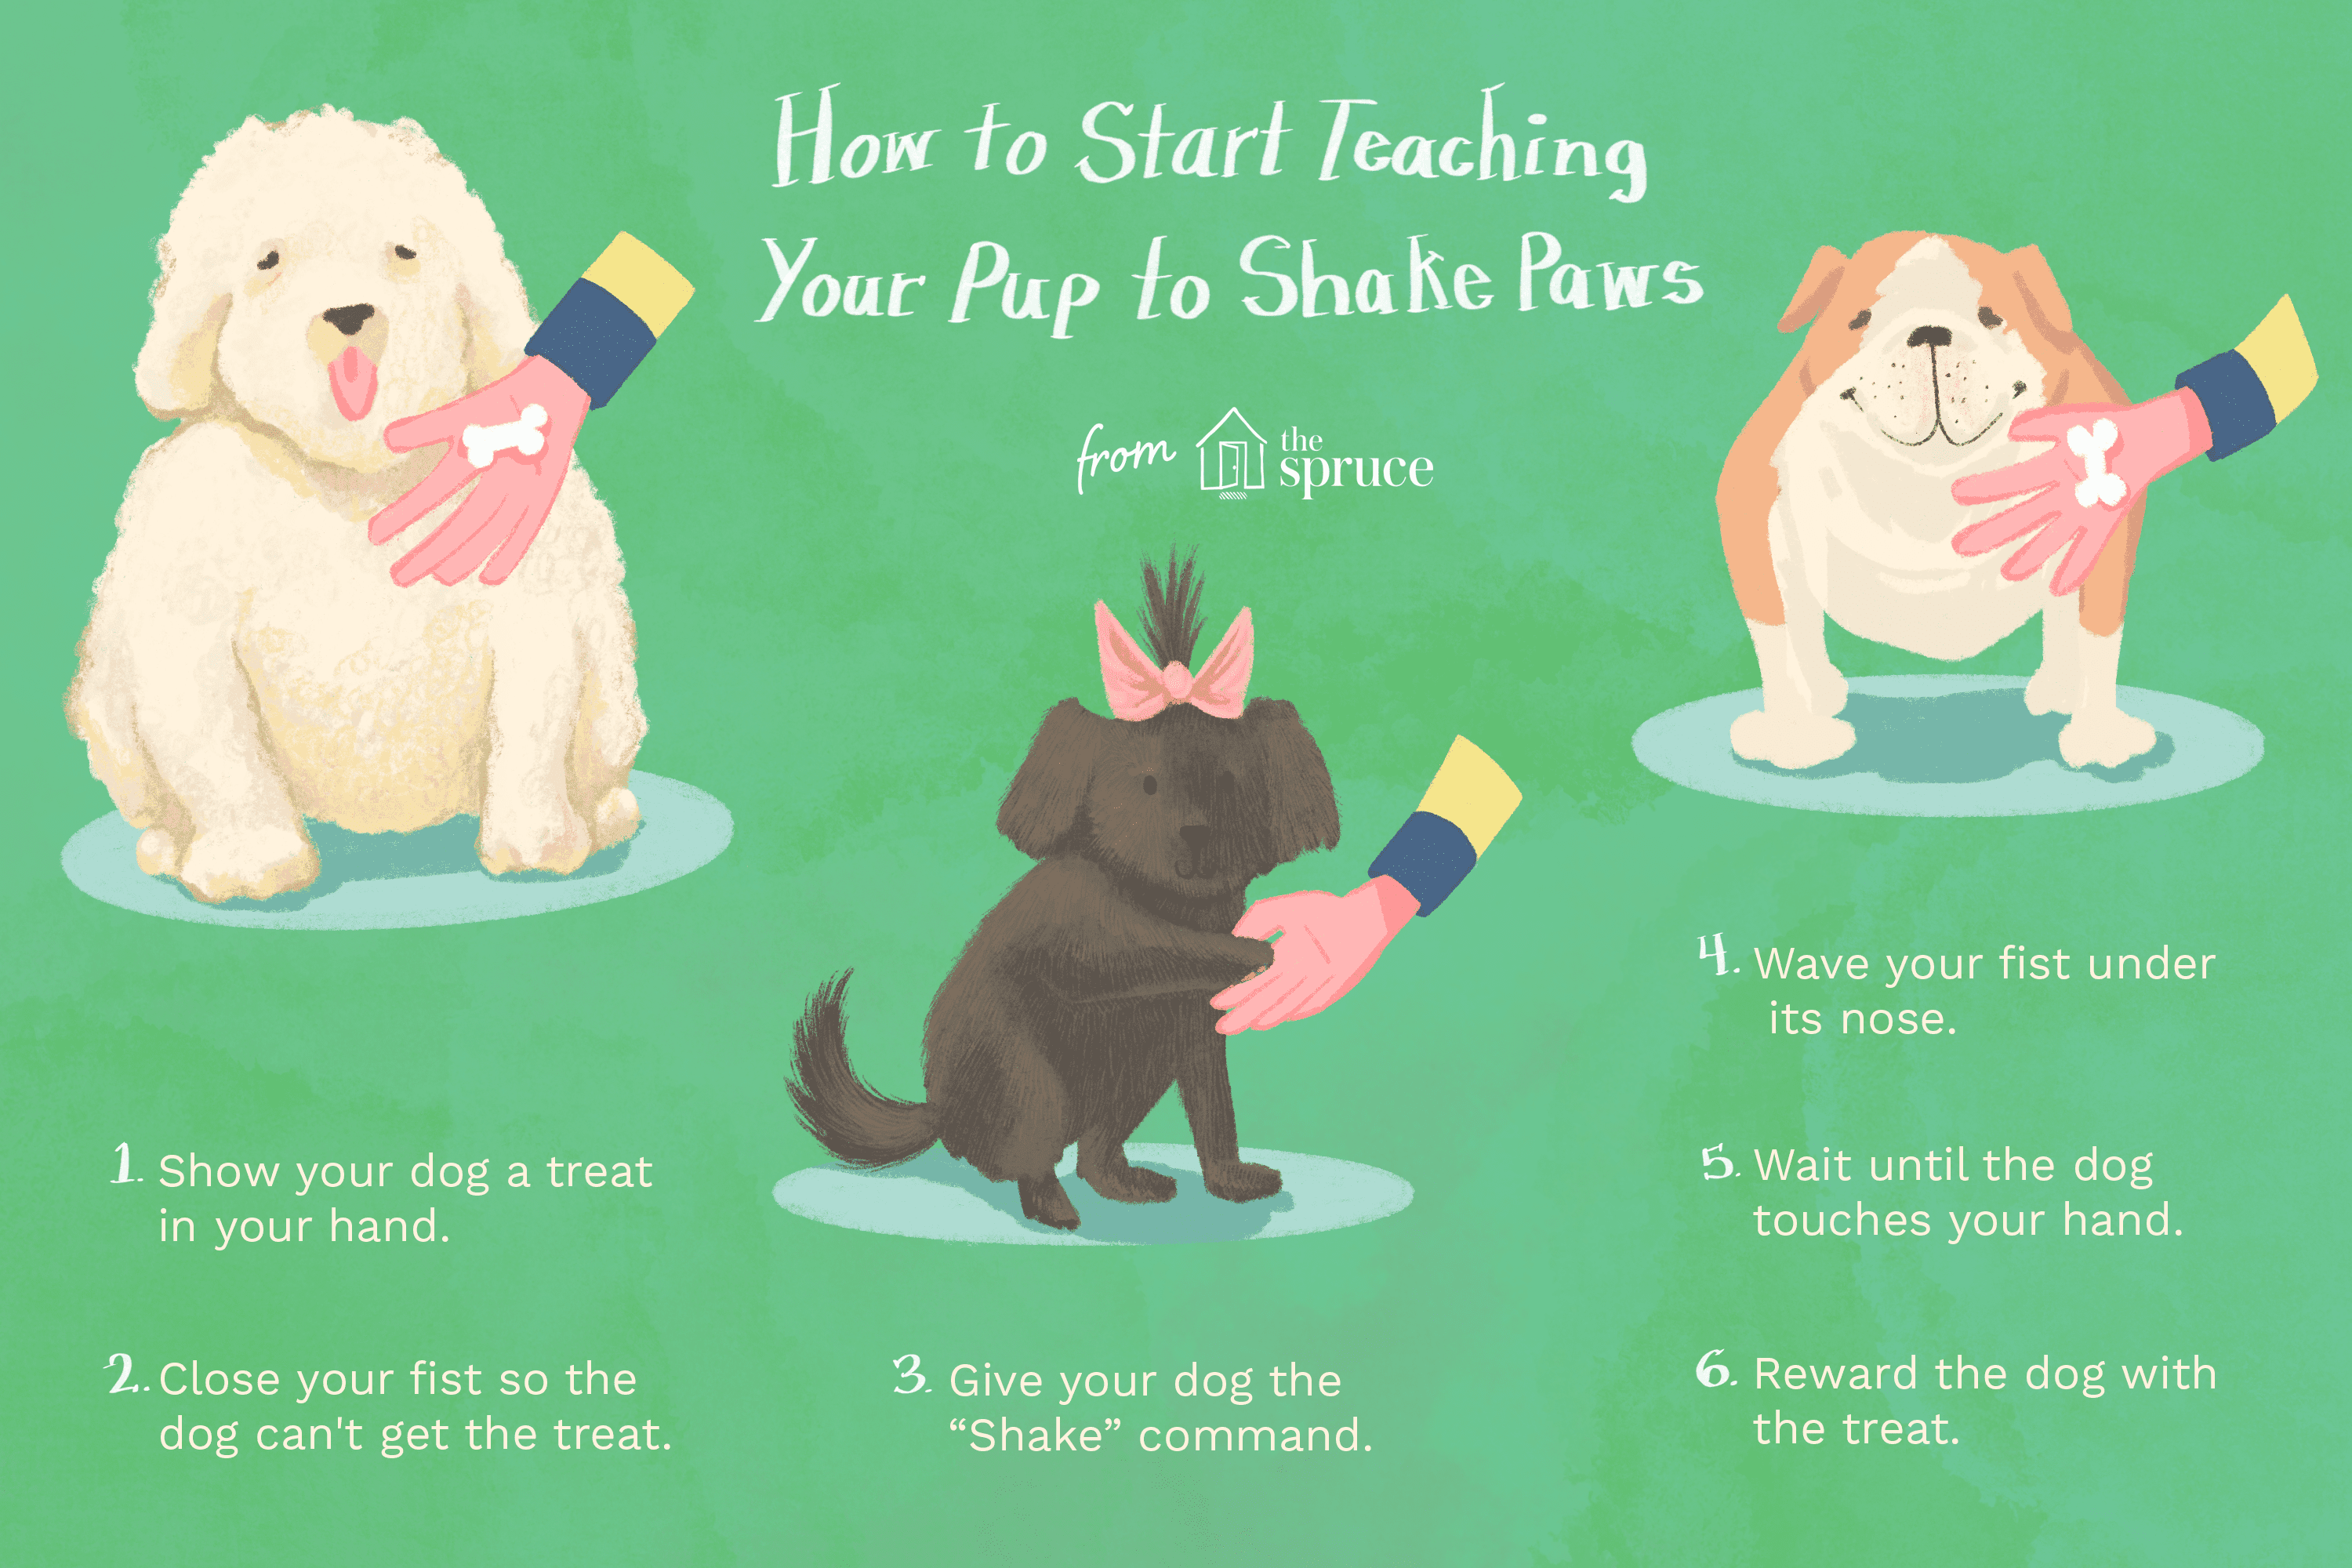 An illustration showing how to train a dog to shake paws